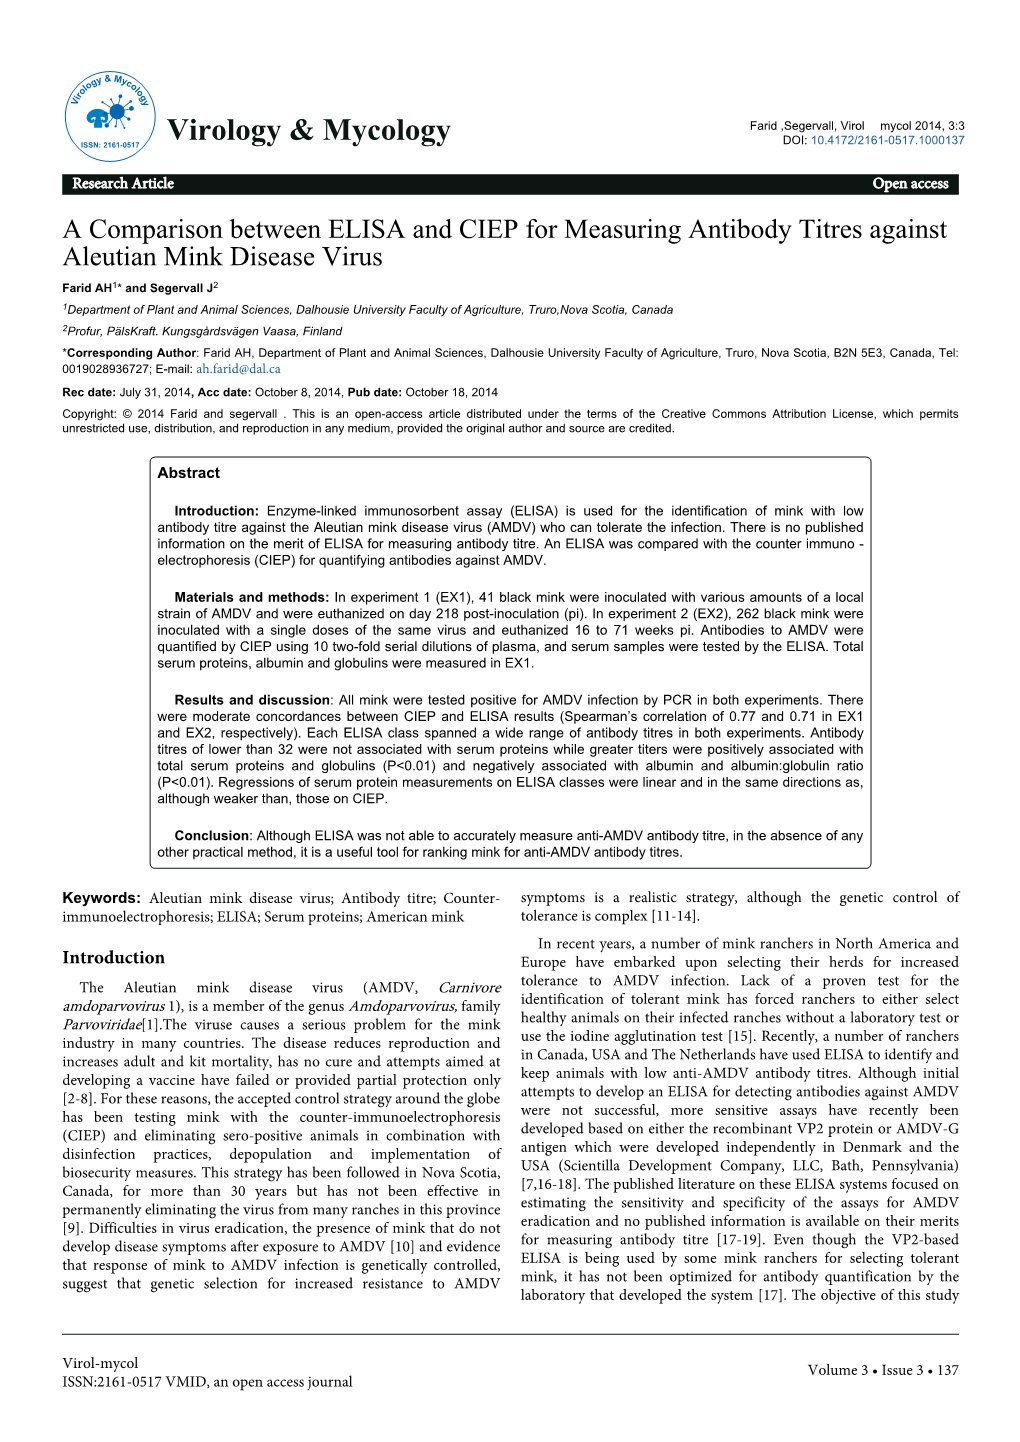 A Comparison Between ELISA and CIEP for Measuring Antibody Titres